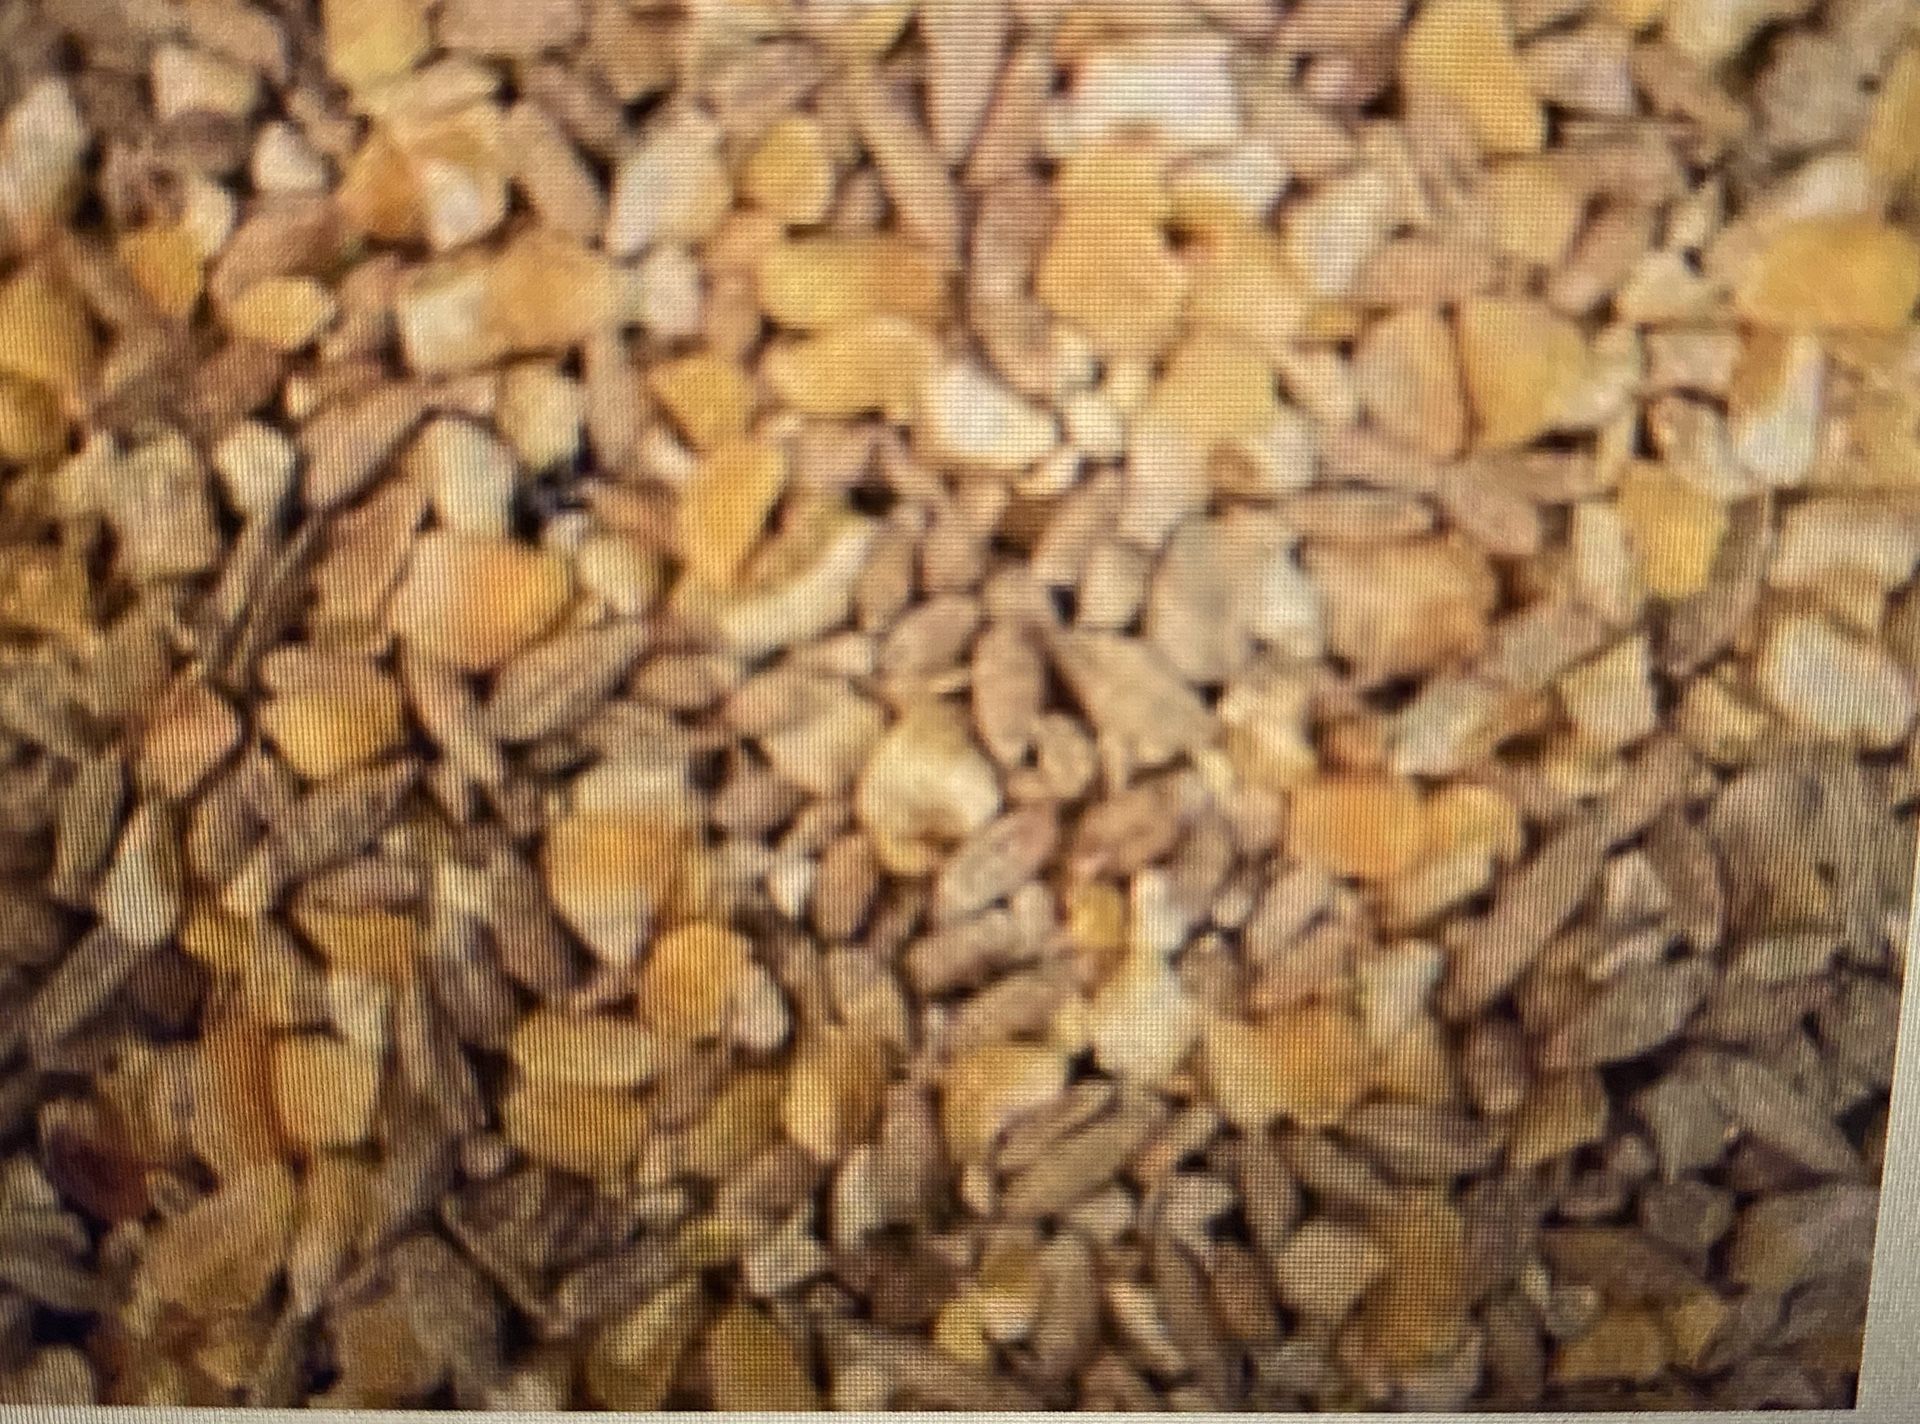 Chicken duck or poultry grain feed 35lb